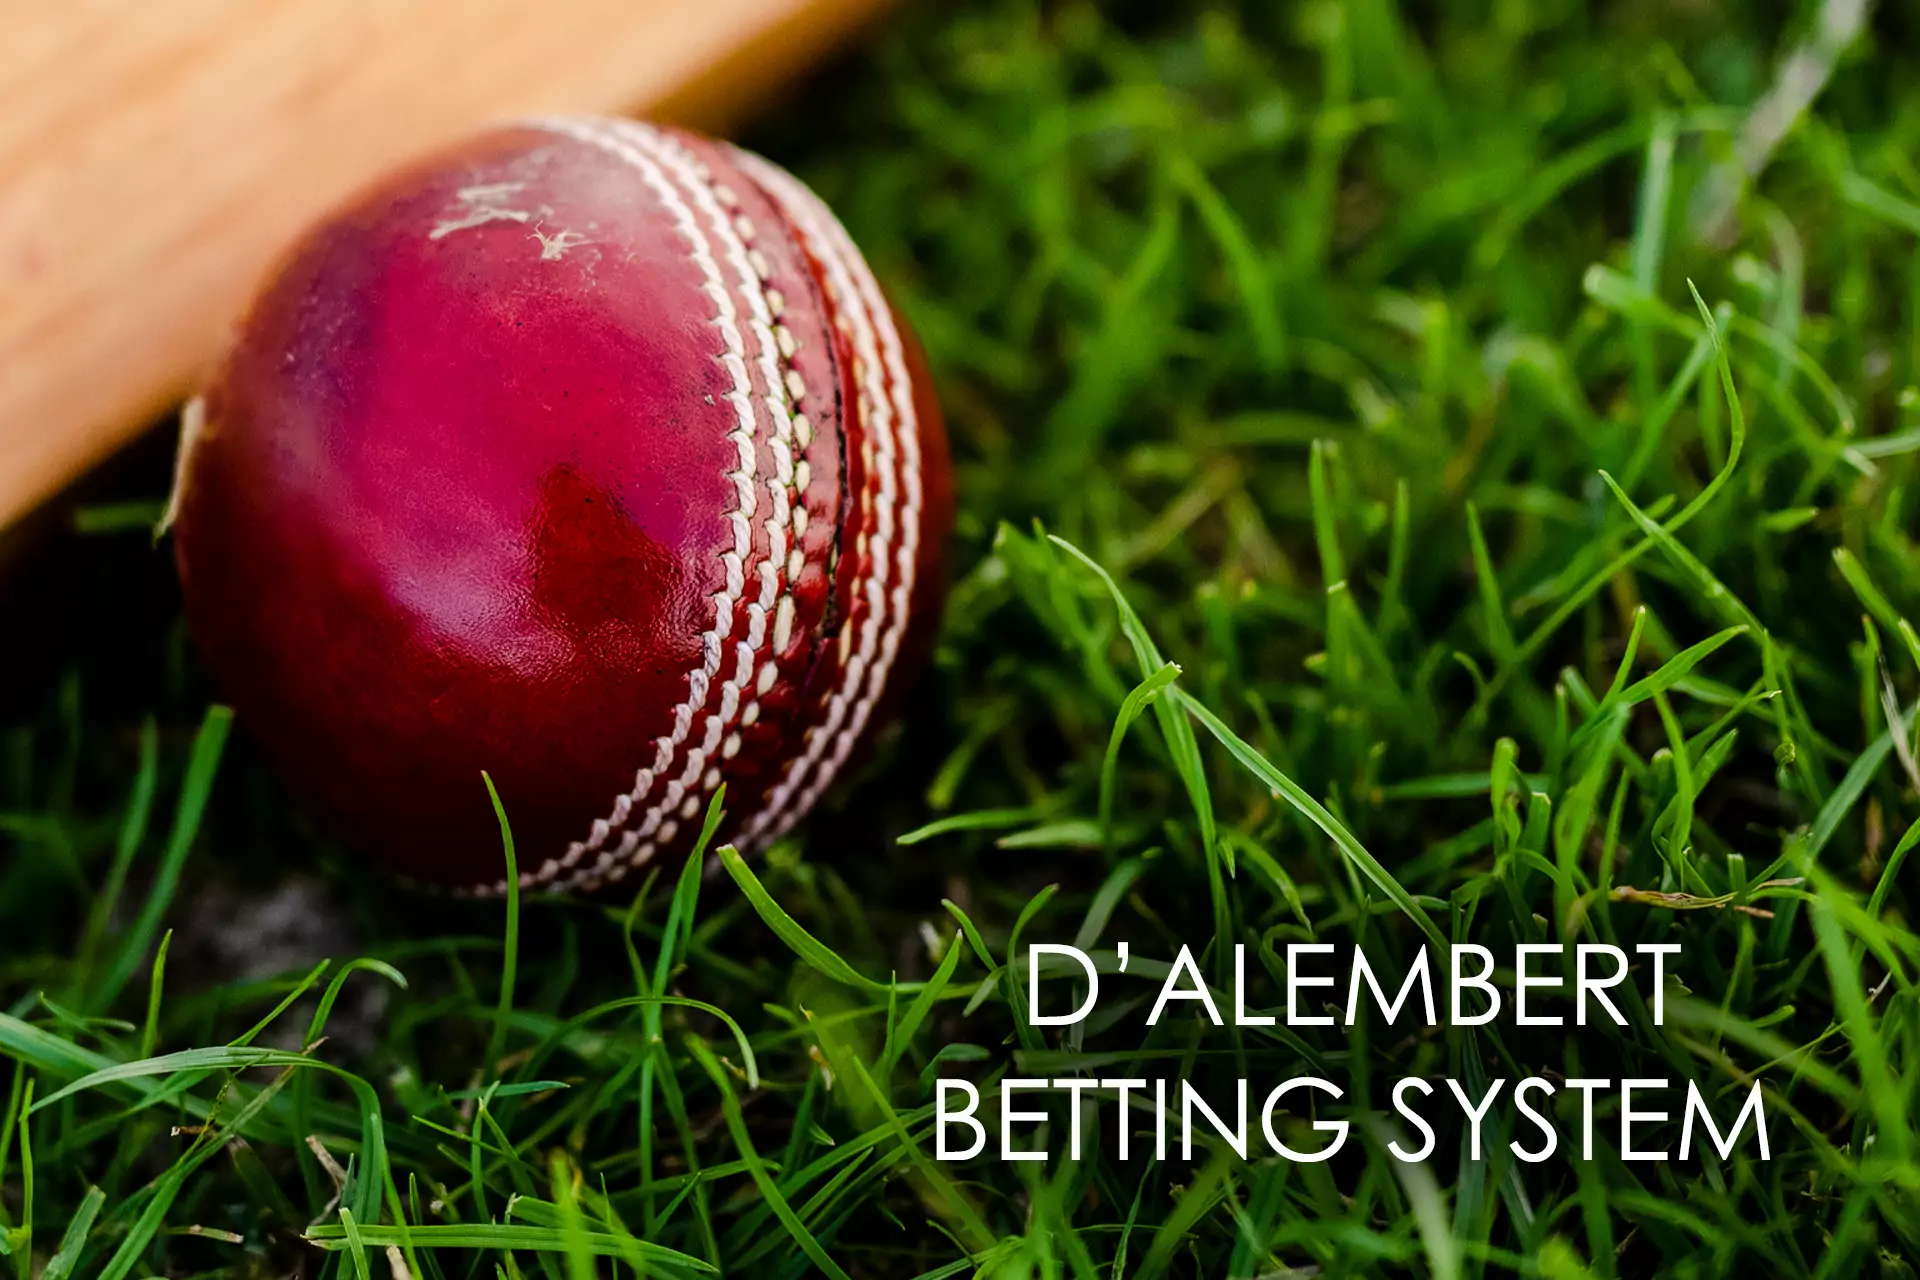 According to the principle of d'Alembert Betting System if you win, you increase the bet by one unit.